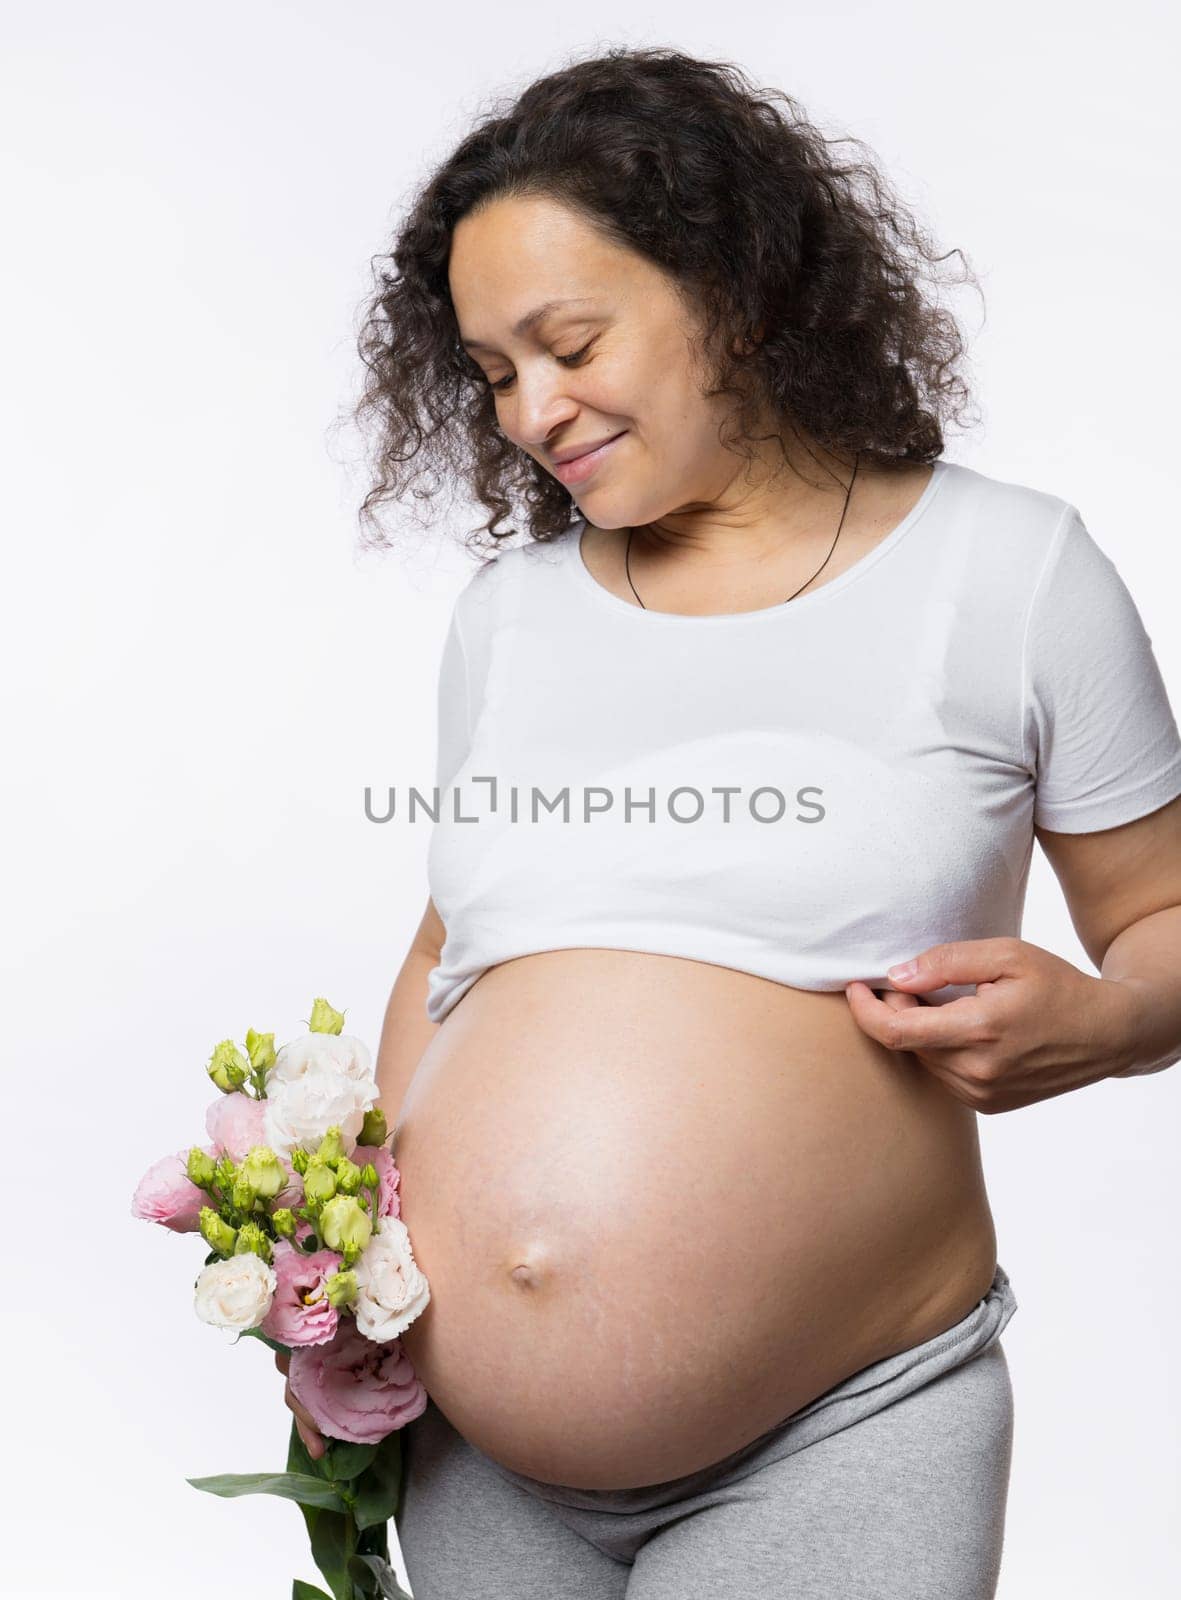 Beautiful multi ethnic gravid woman holding bunch of flowers, smiling looking at her pregnant belly in late pregnancy by artgf